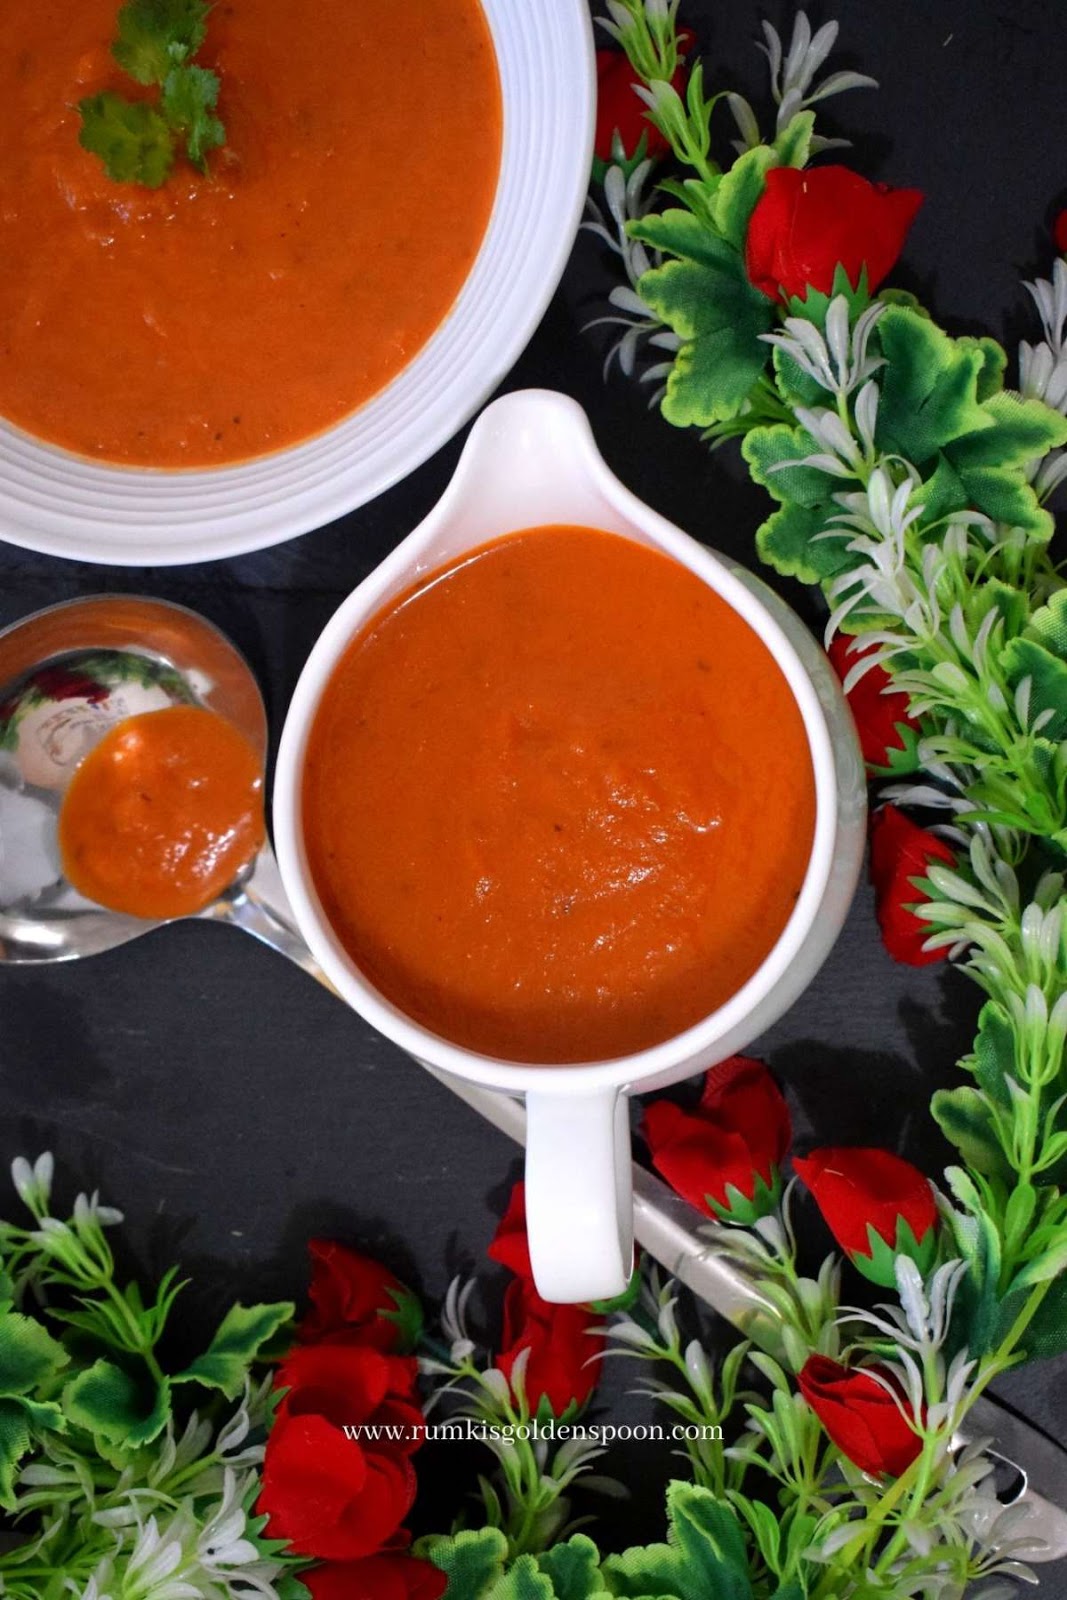 roasted red pepper and tomato soup, spicy roasted red pepper and tomato soup recipe, recipe for roasted red pepper and tomato soup, roasted red pepper and tomato soup recipe, roasted tomato and red pepper soup recipe, roasted tomato and red pepper soup, soup recipe, soup recipes, soup recipe tomato, Rumki's Golden Spoon